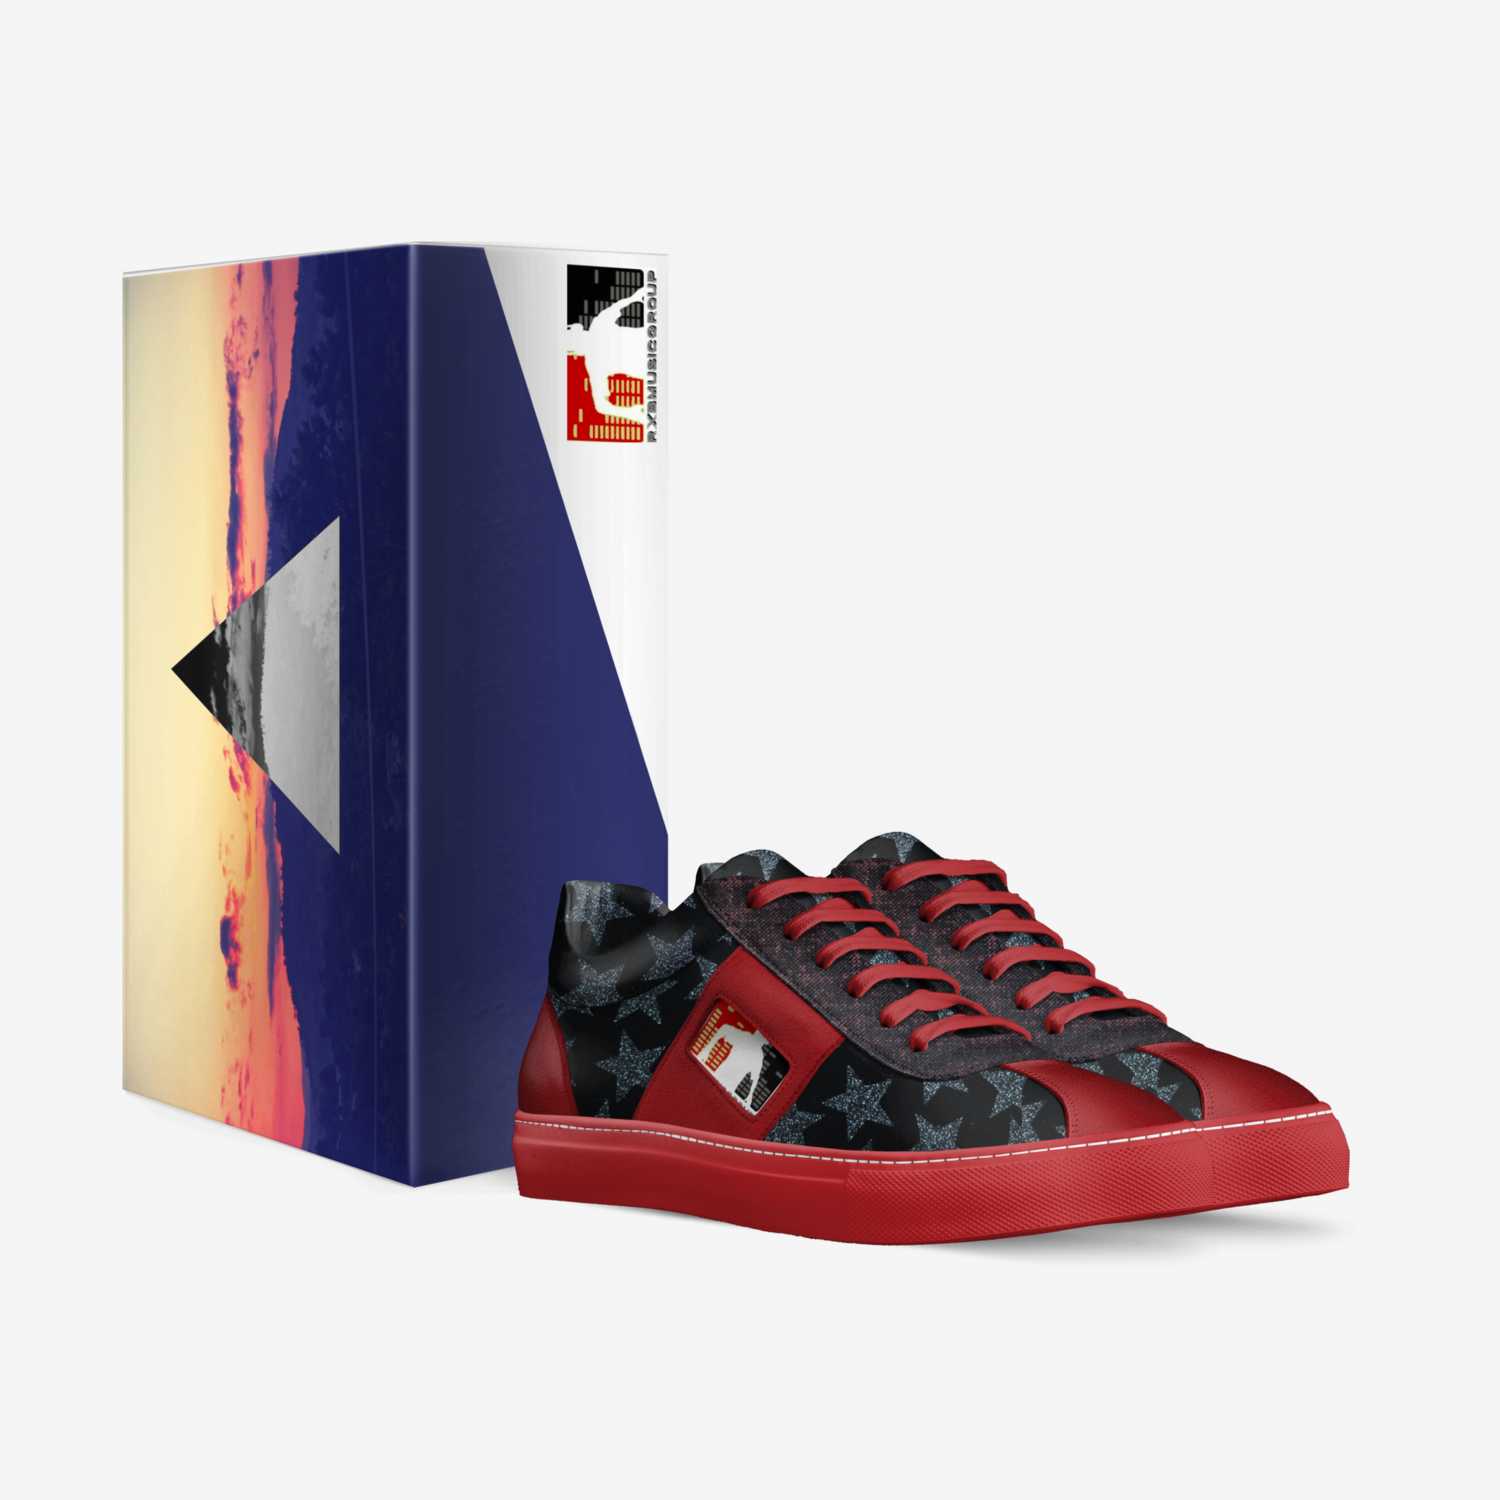 RXBMUSICGROUP custom made in Italy shoes by Royce Bazley | Box view